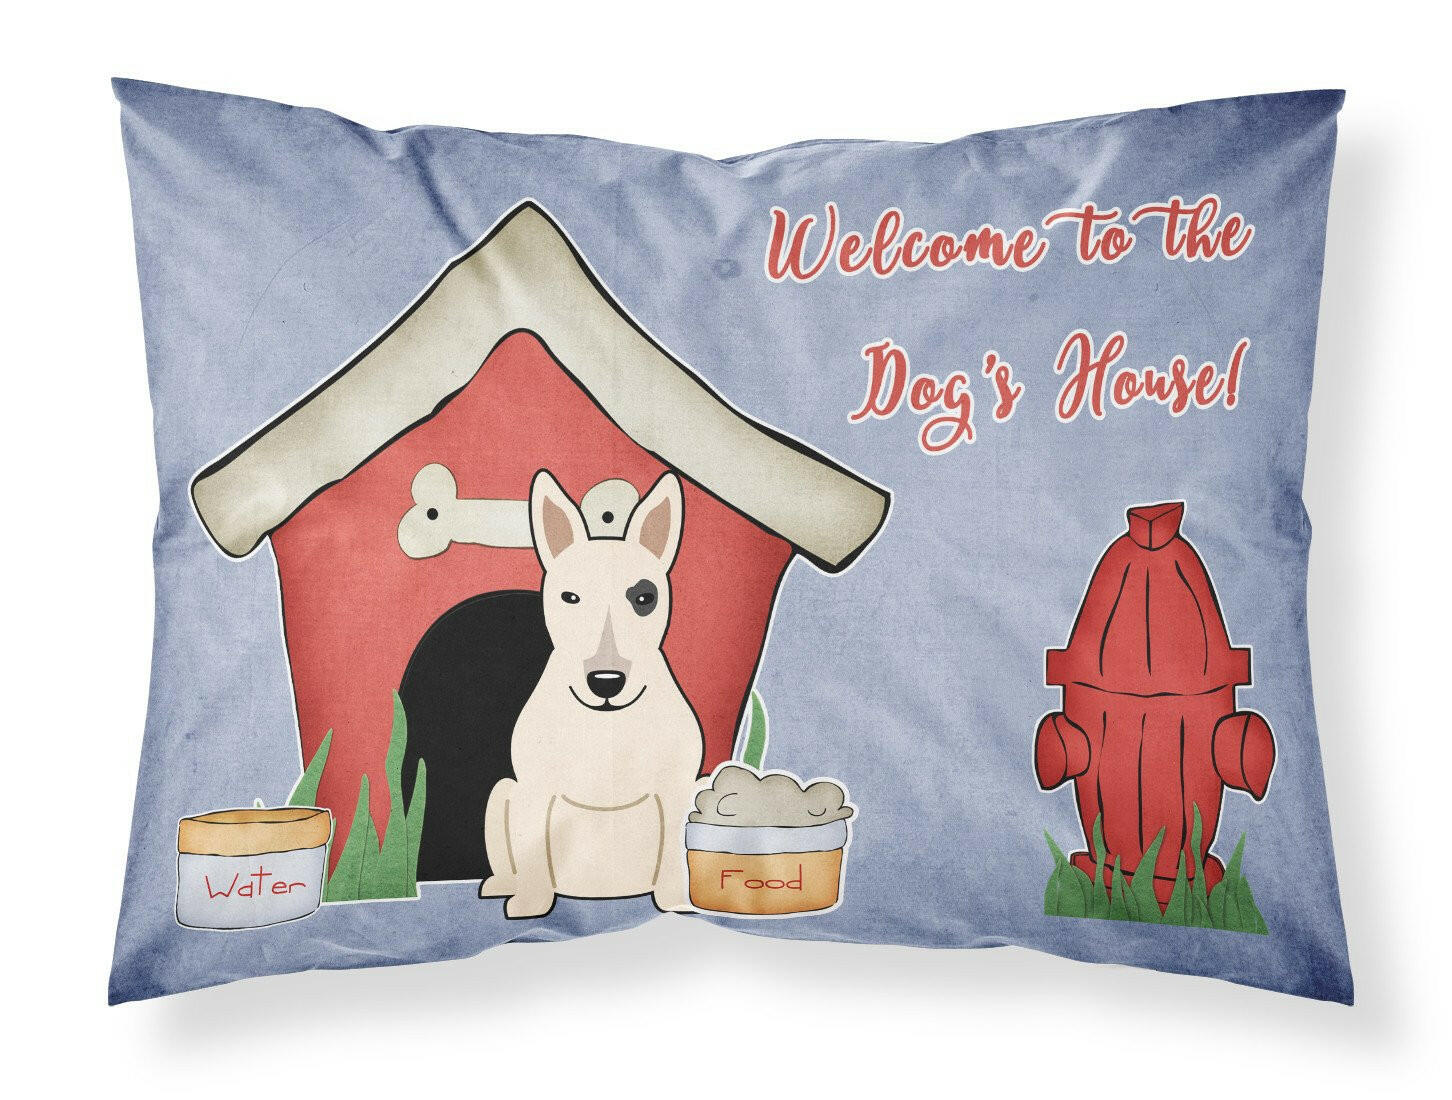 Dog House Collection Bull Terrier White Fabric Standard Pillowcase BB2892PILLOWCASE by Caroline's Treasures